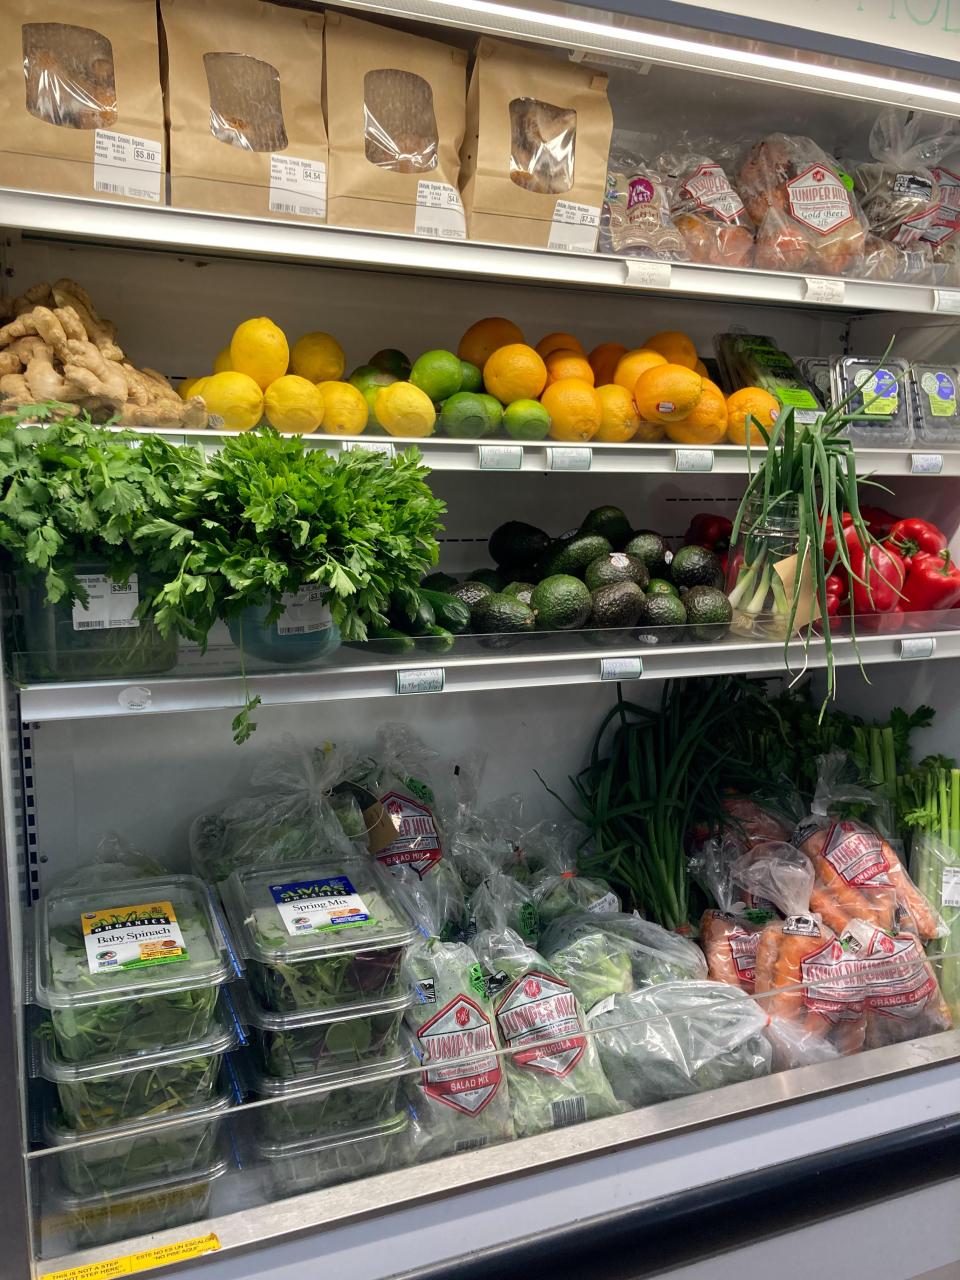 A few shelves of fresh produce and baked bread.